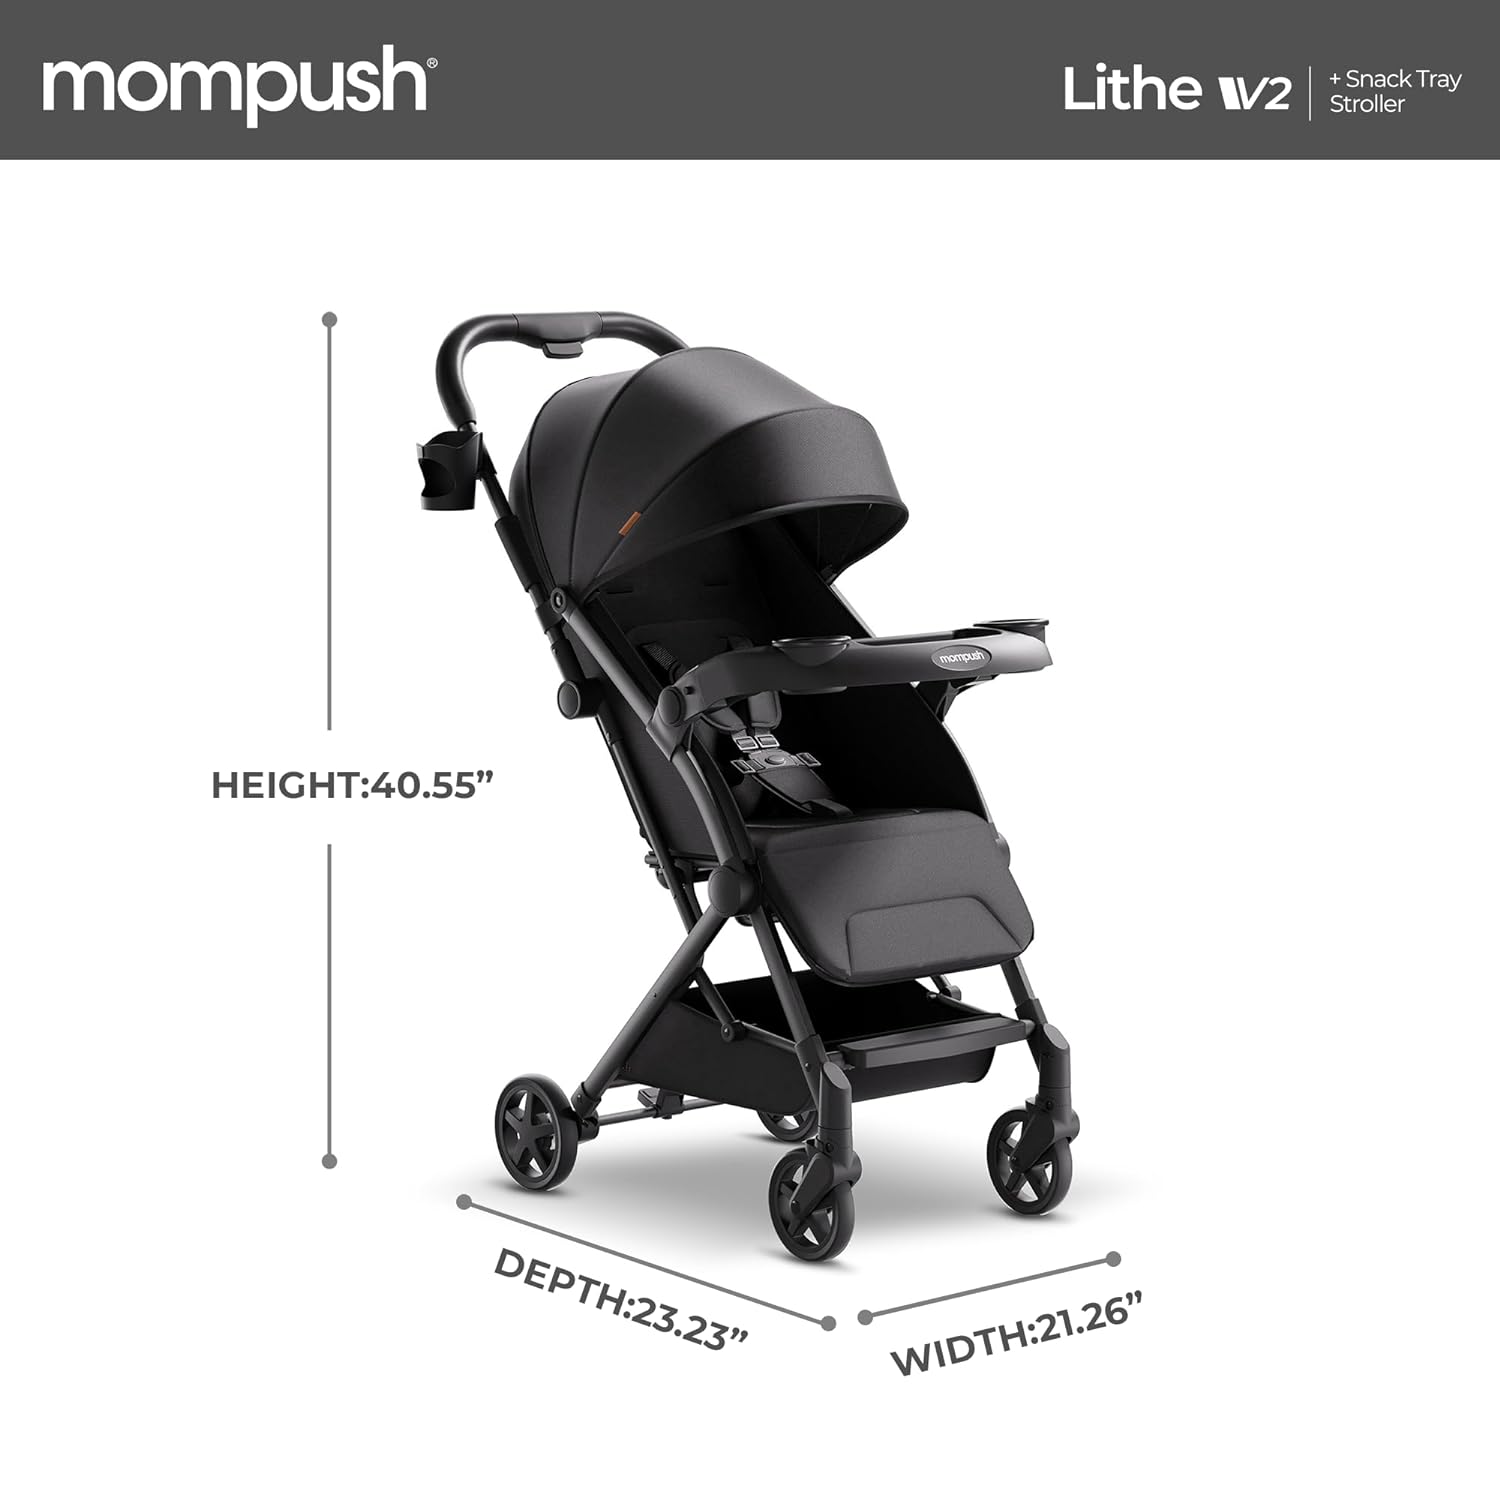 Mompush Lithe V2 Lightweight Stroller + Snack Tray, Ultra-Compact Fold  Airplane Ready Travel Stroller, Near Flat Recline Seat, Cup Holder, Raincover  Travelbag Included - Mompush Lithe V2 Lightweight Stroller + Snack Tray Review